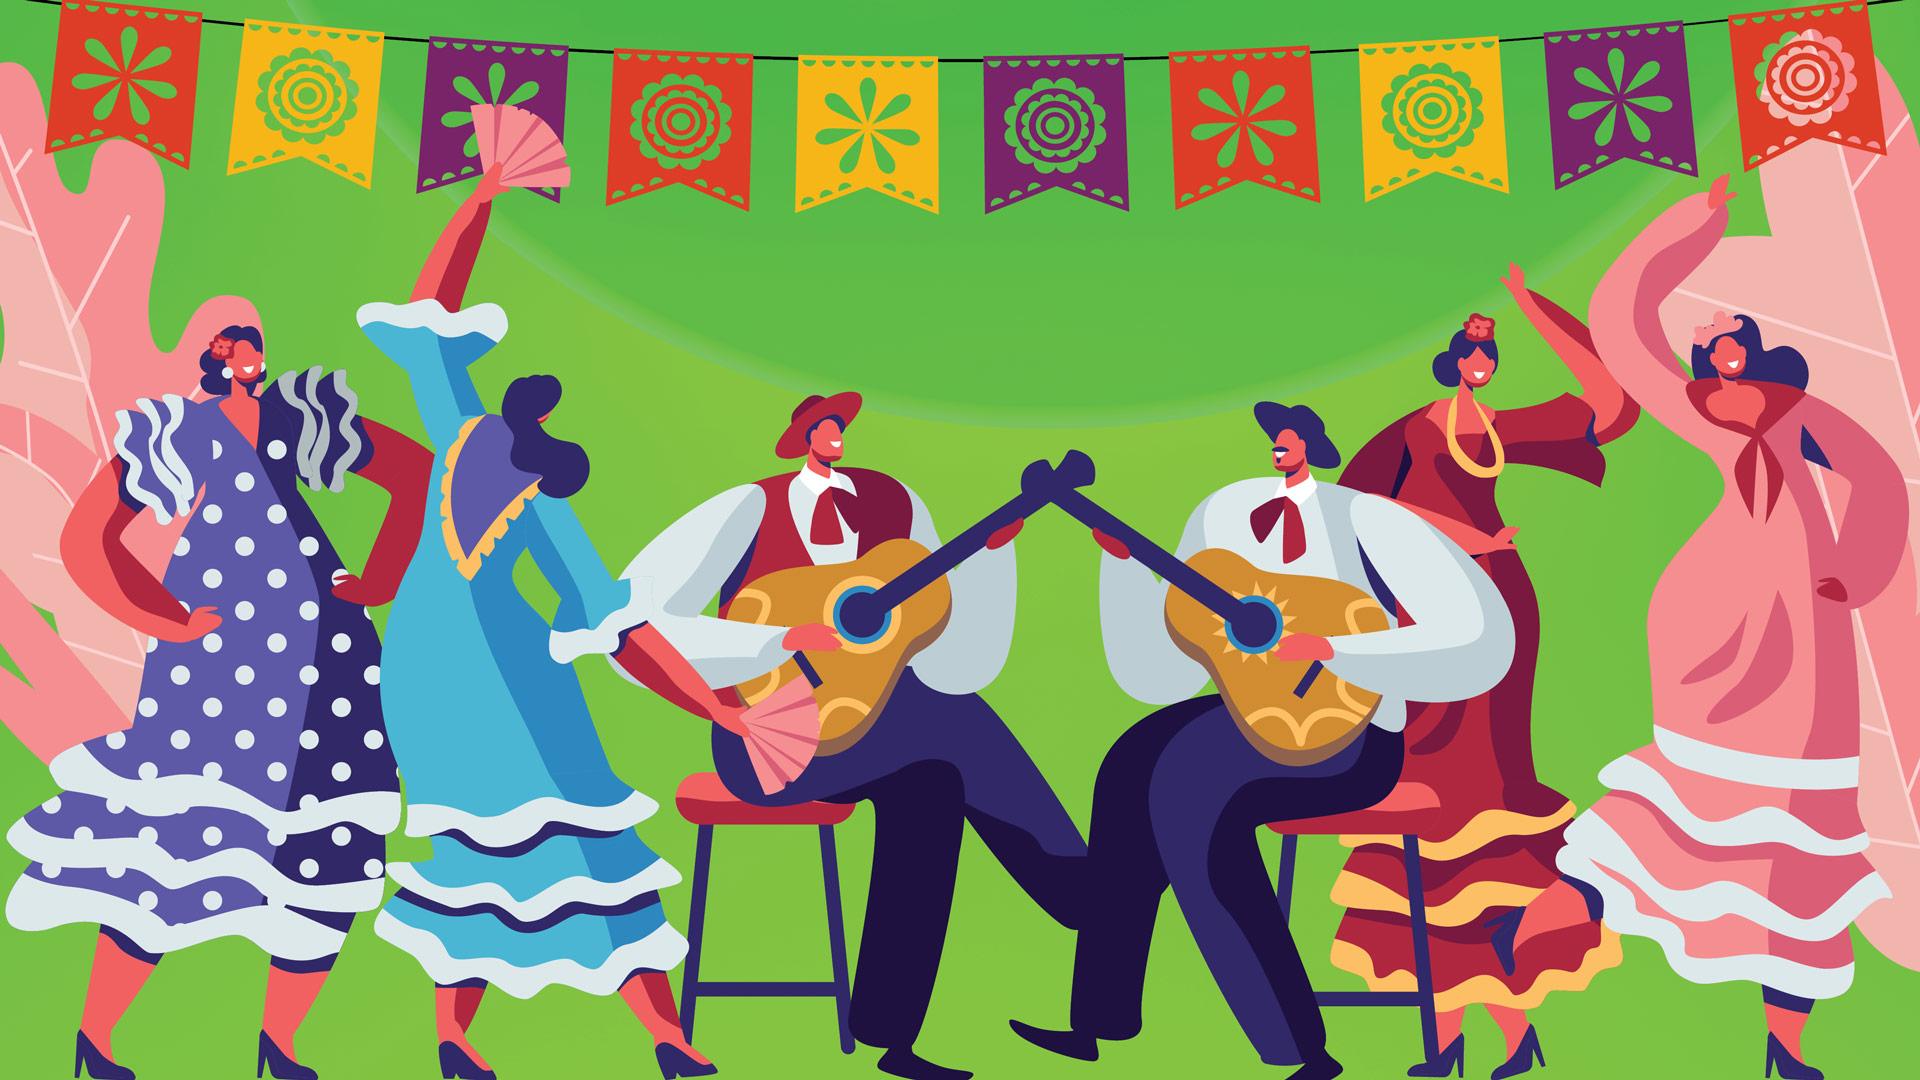 Background image for Hispanic Heritage Month Kickoff Weekend